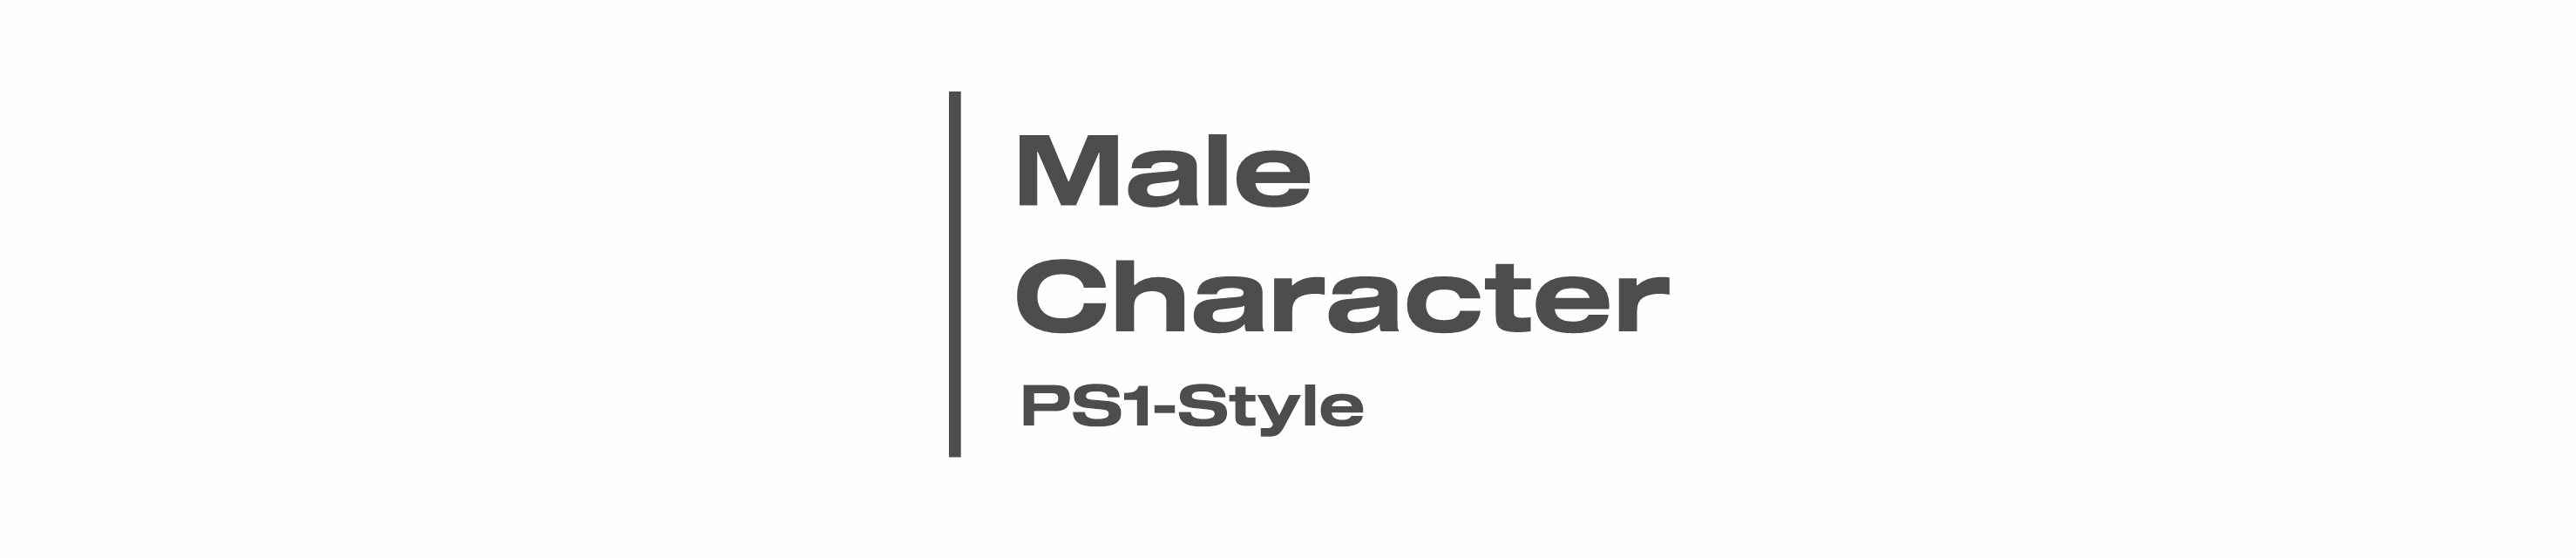 Male Character in PS1-Style | Asset